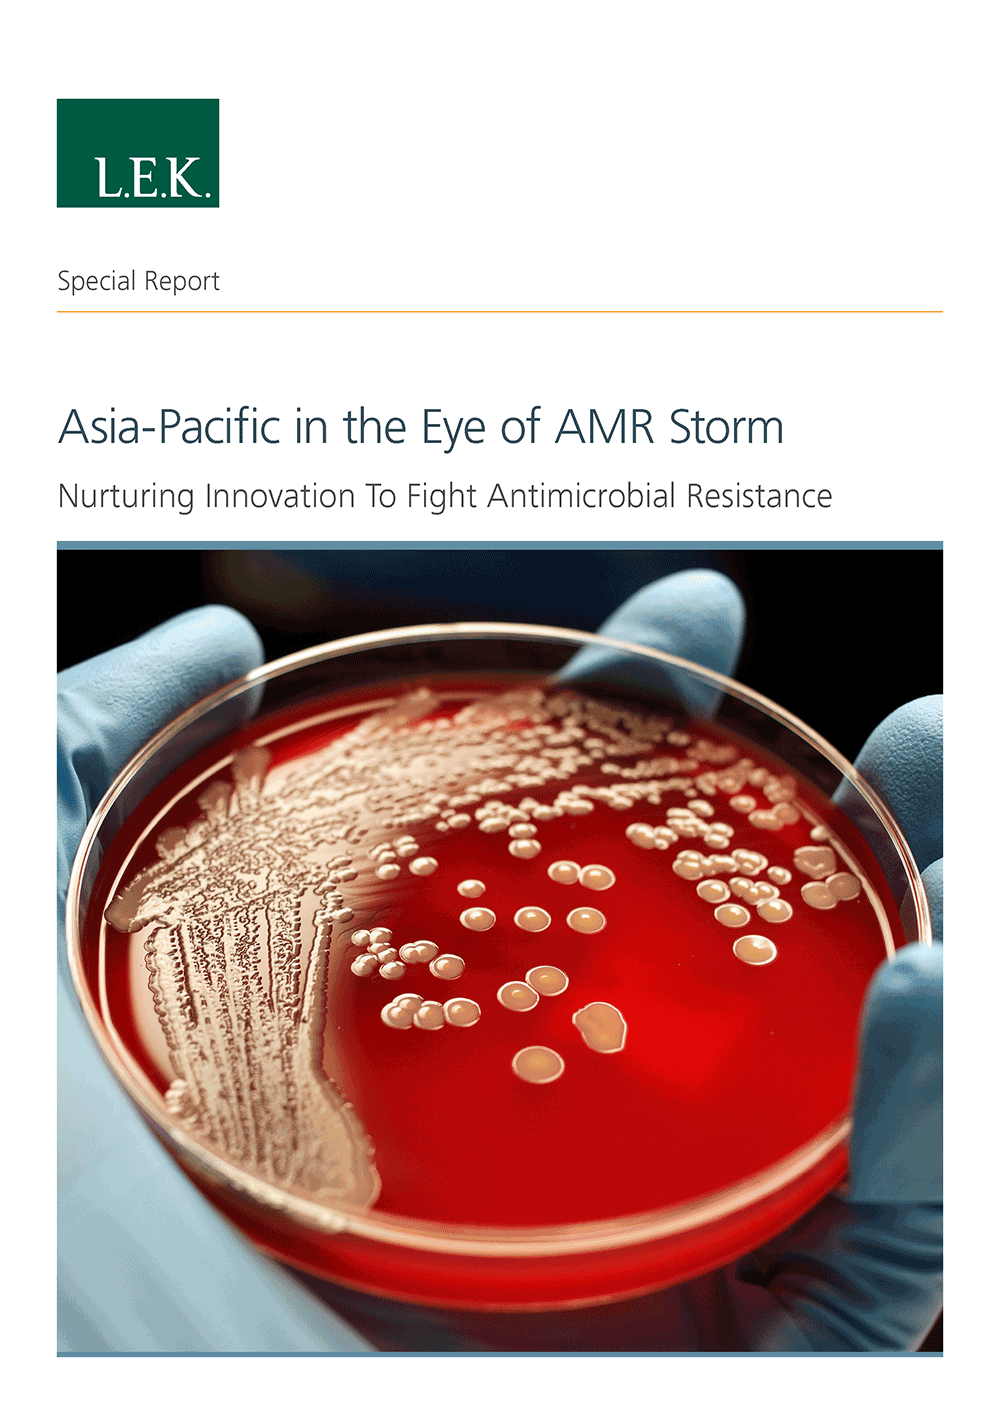 Antimicrobial resistance innovation report